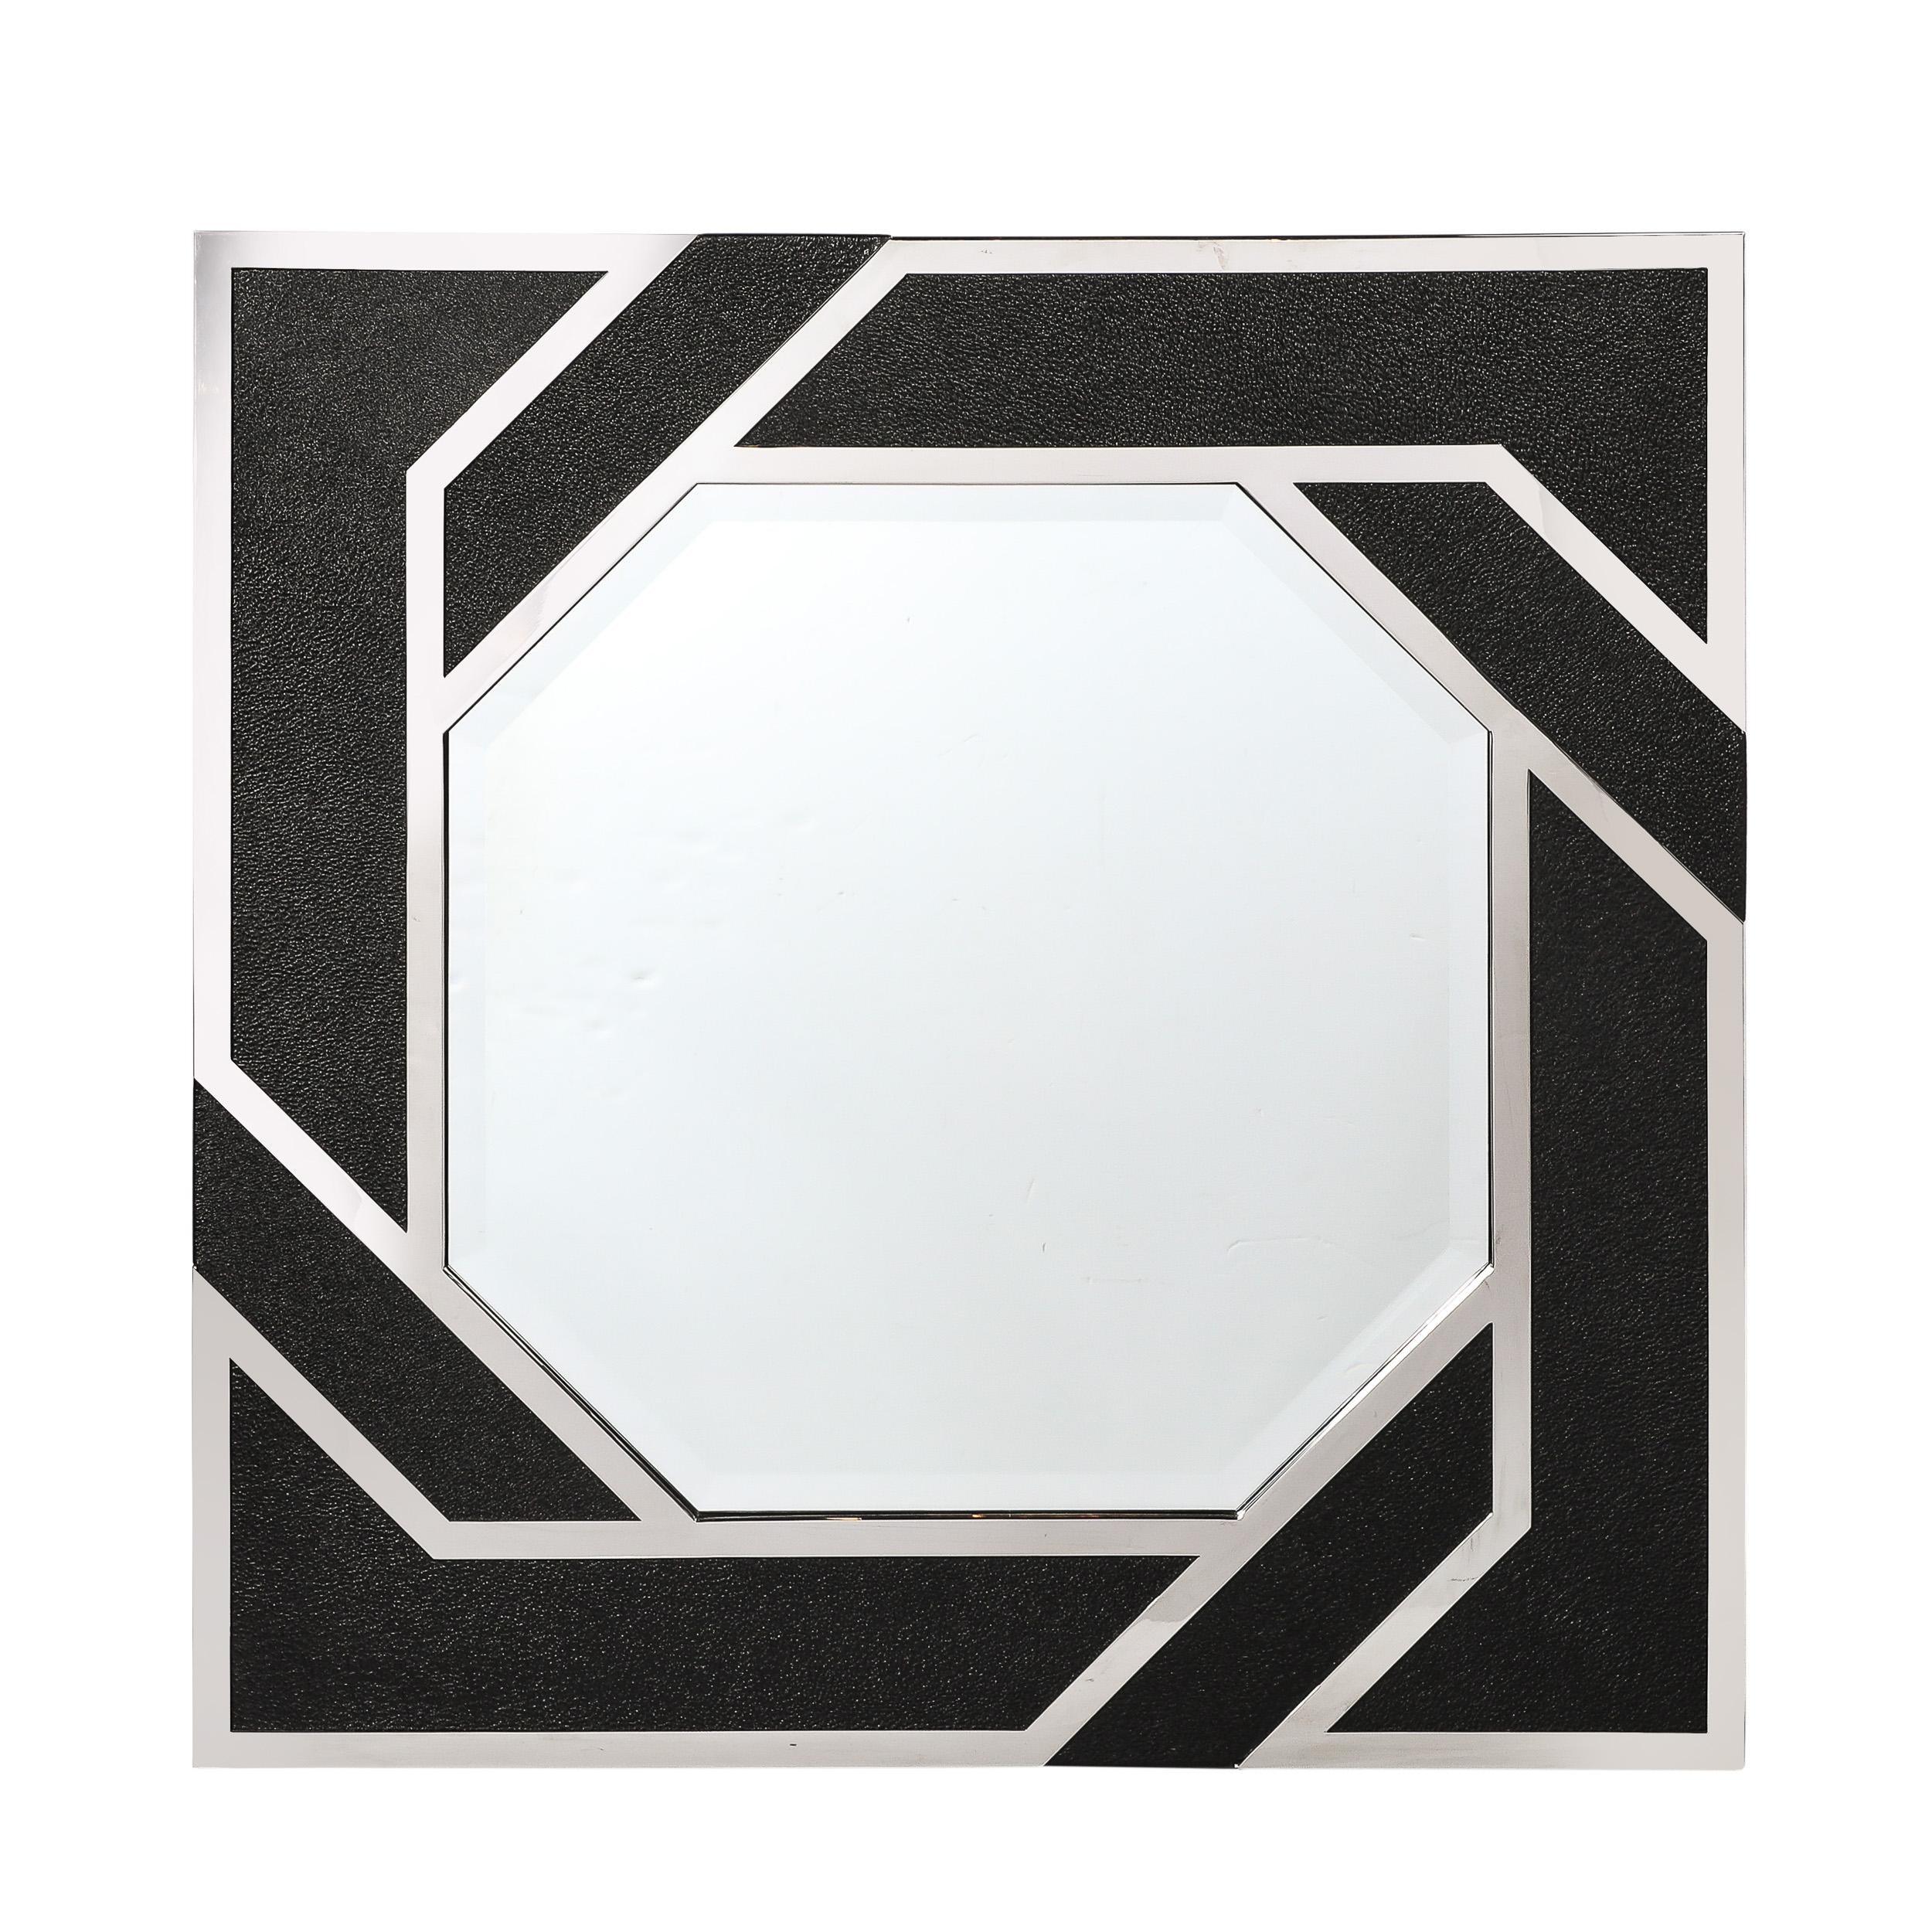 This bold and dynamic Modernist Spiral Form Geometric Mirror in Embossed Leather and Chrome is created by Lorin Marsh and originates from the United States during the latter half of the 20th Century. Features a framework composed in rectilinear